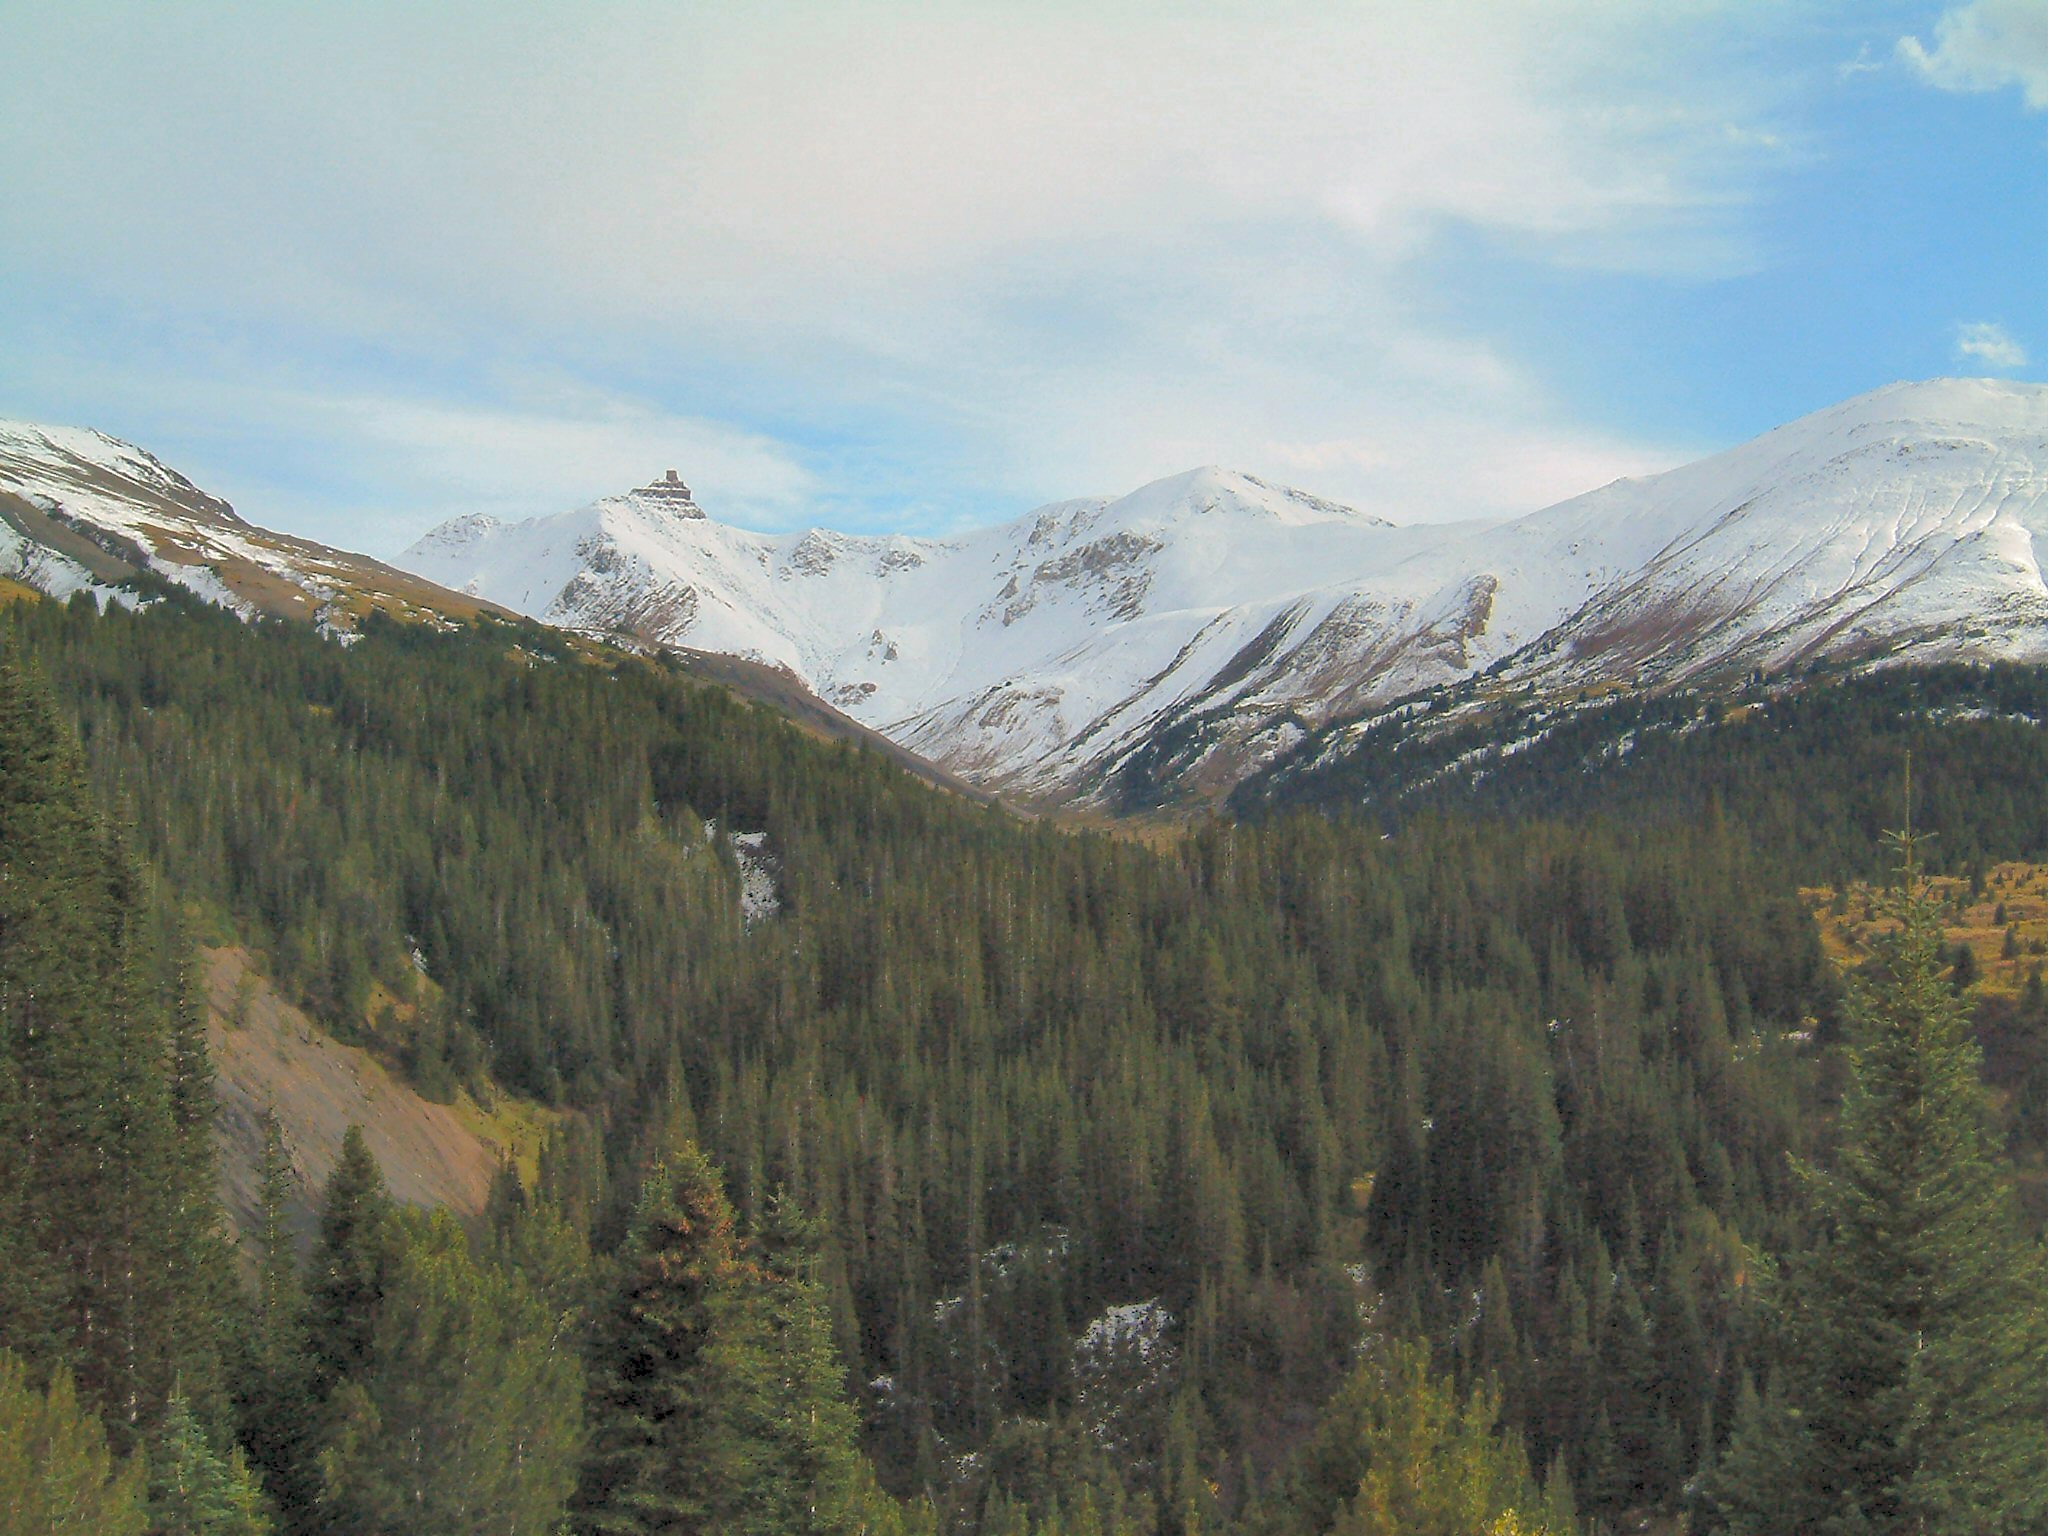 View on snow covered sandy shale mountain tops with forested valleys.